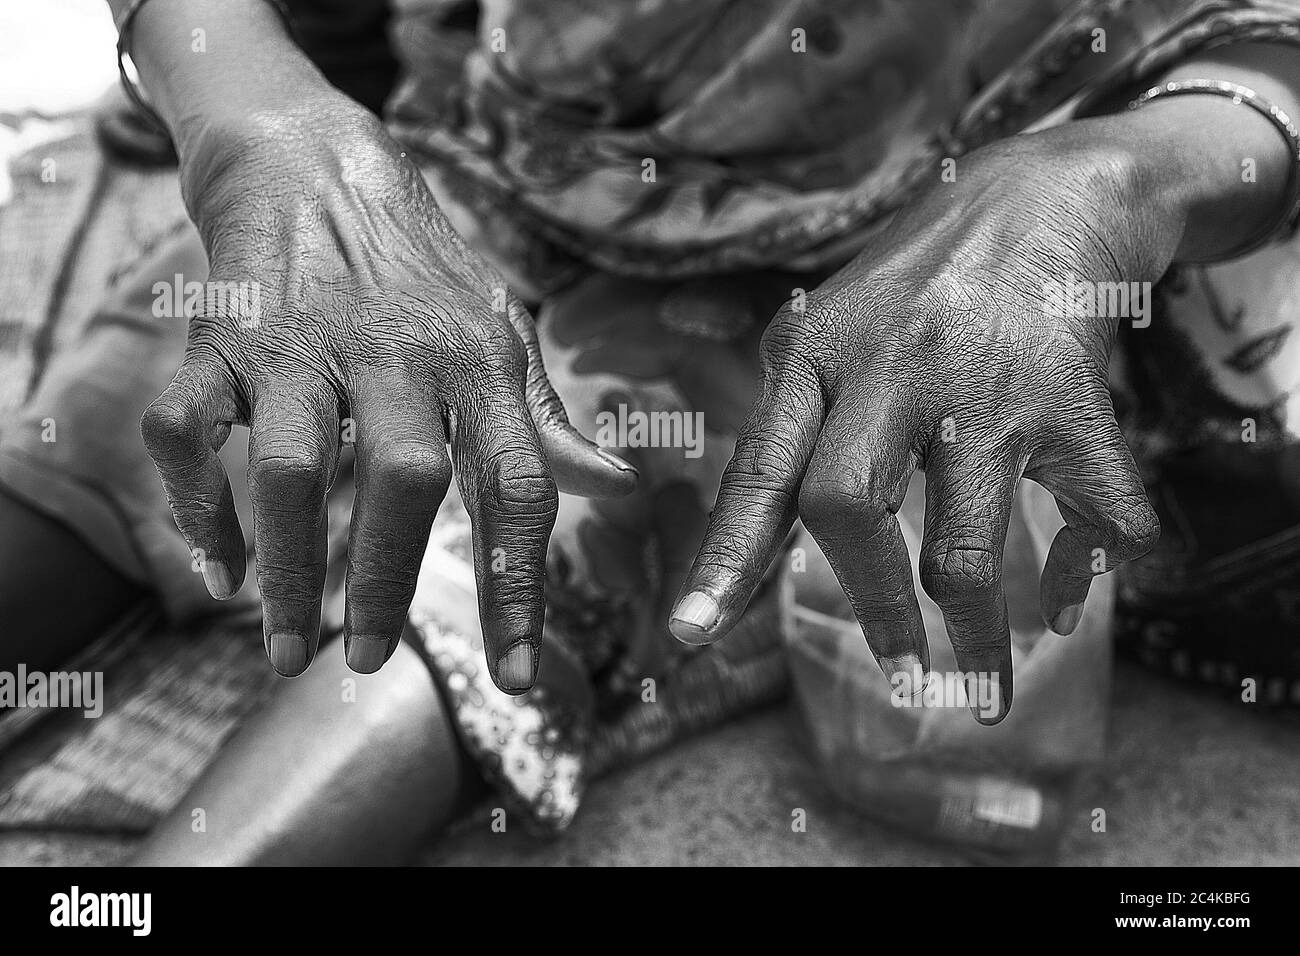 Suguna’s fingers are crippled with arthritis and she has self-confessed mental illness so she cannot seek work. She says she feels trapped and veers f Stock Photo